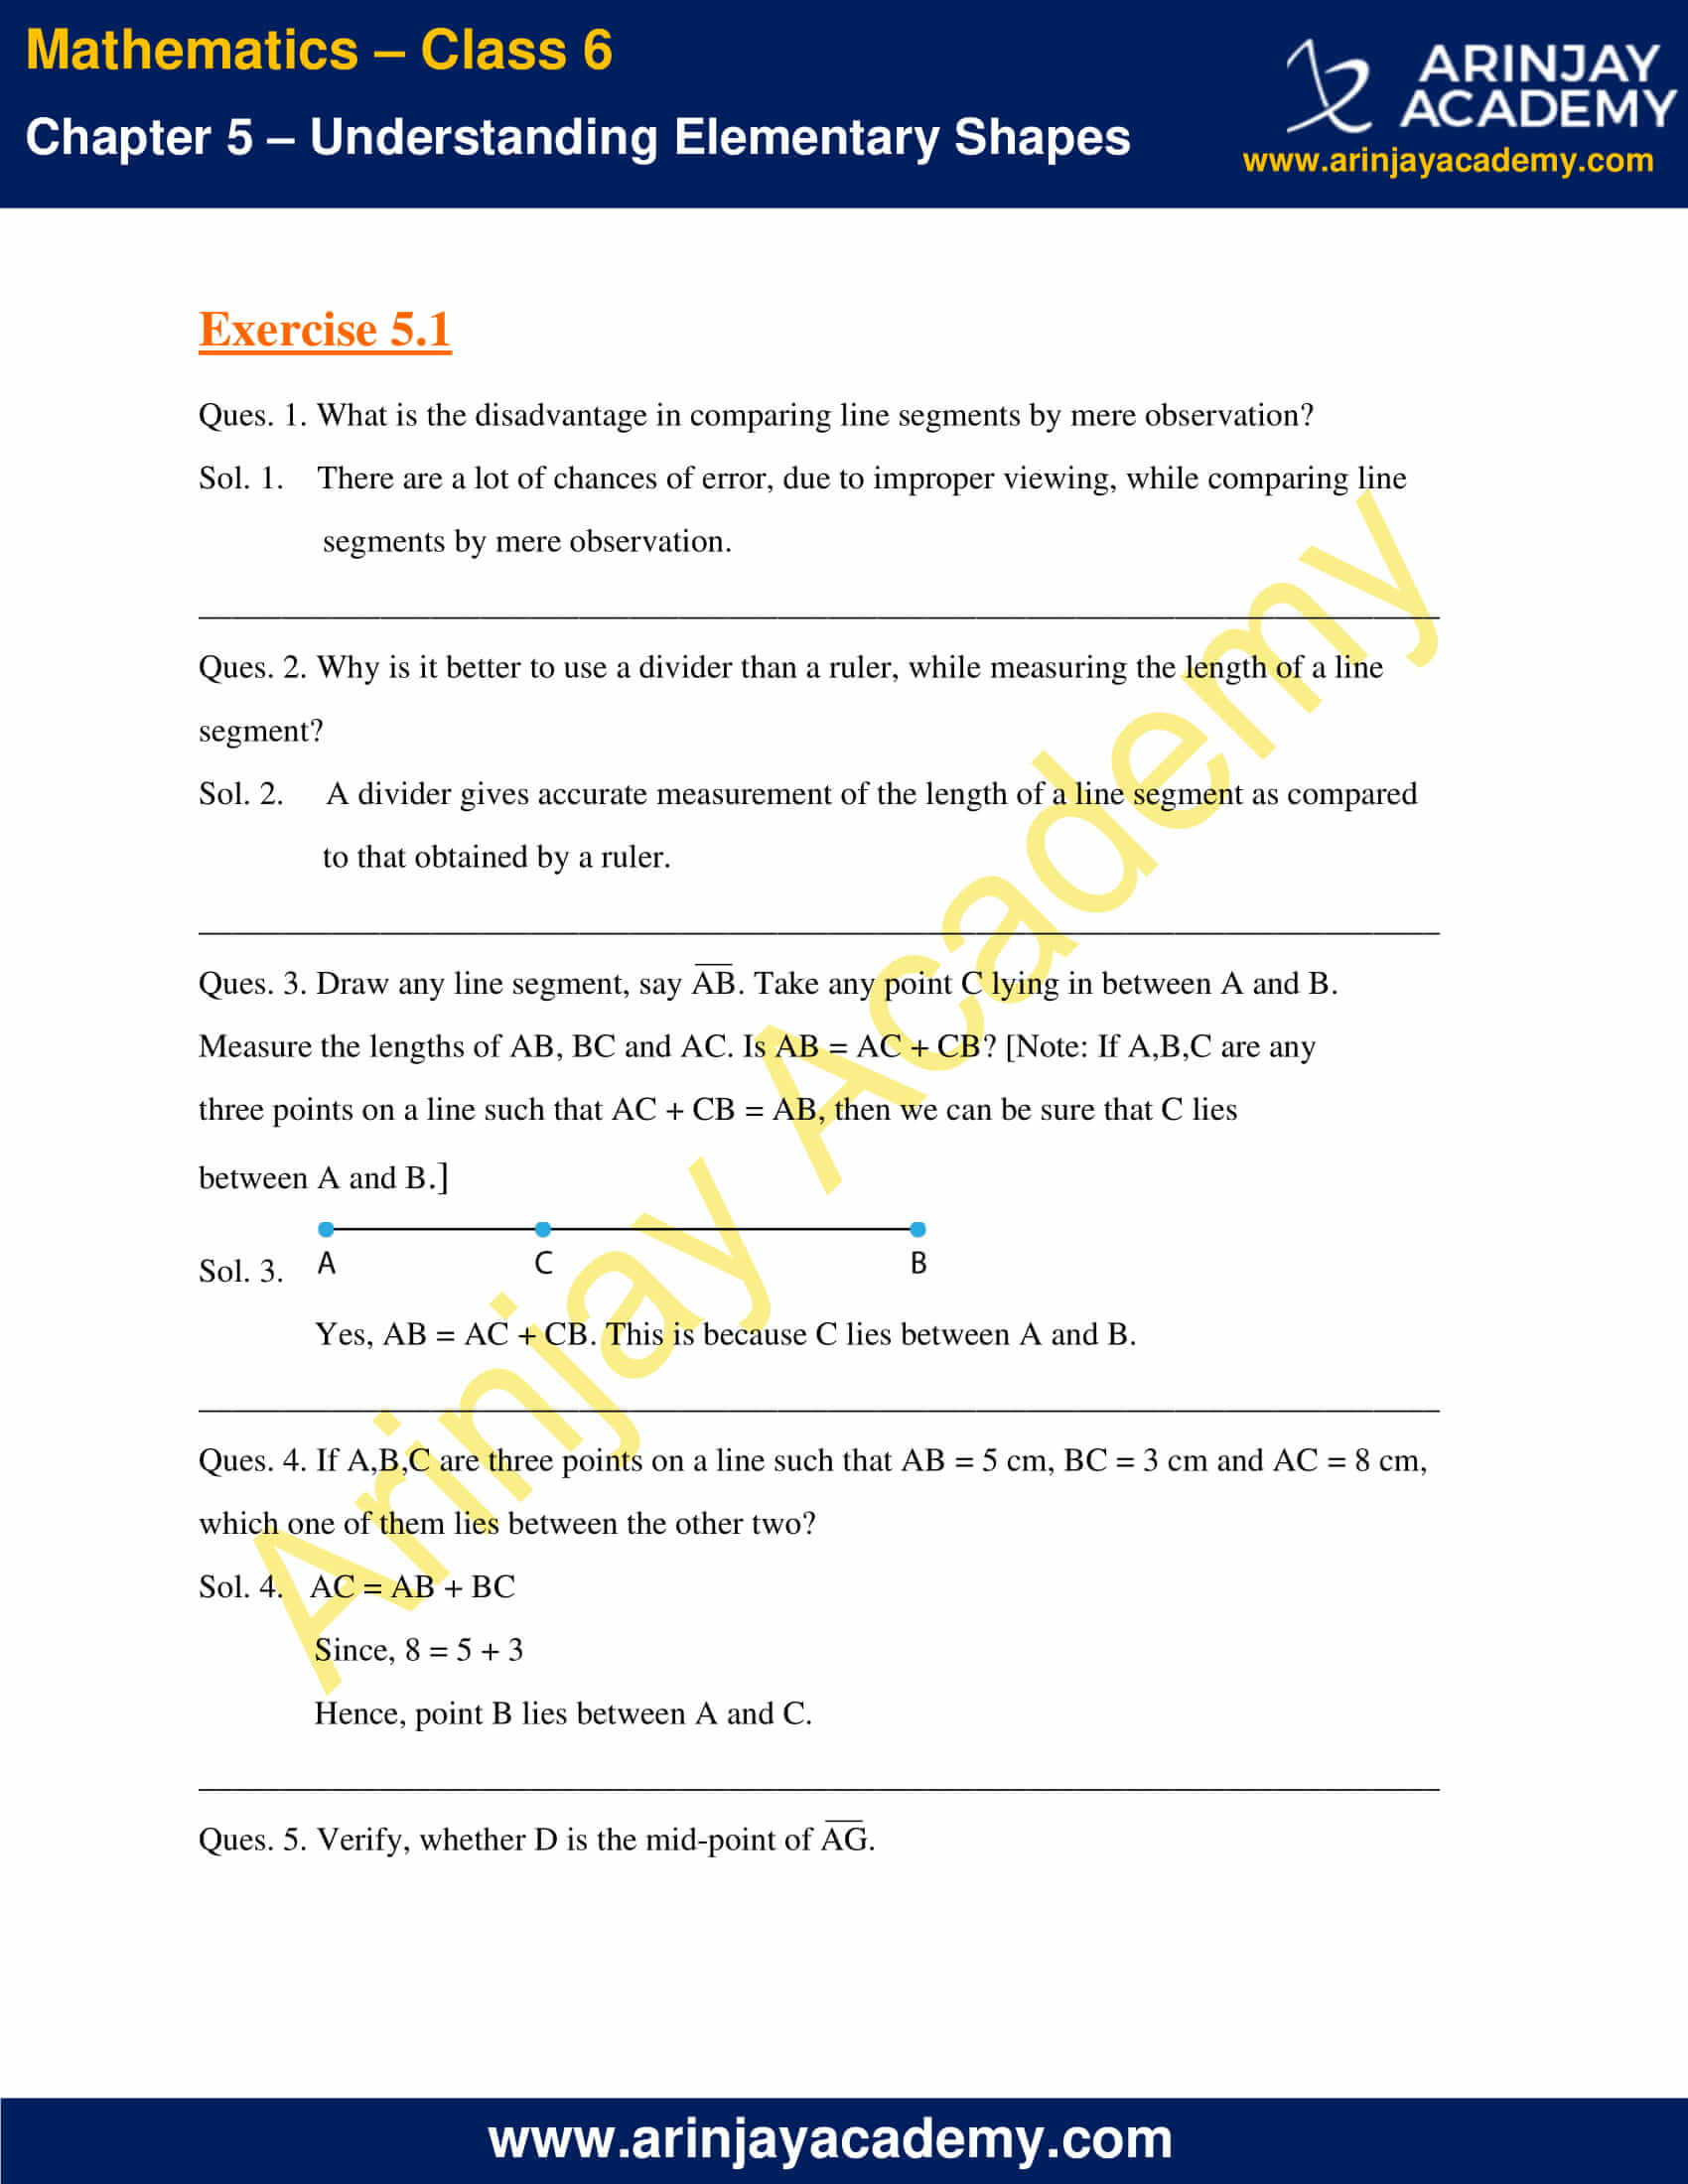 NCERT Solutions for Class 6 Maths Chapter 5 Exercise 5.1 image 1